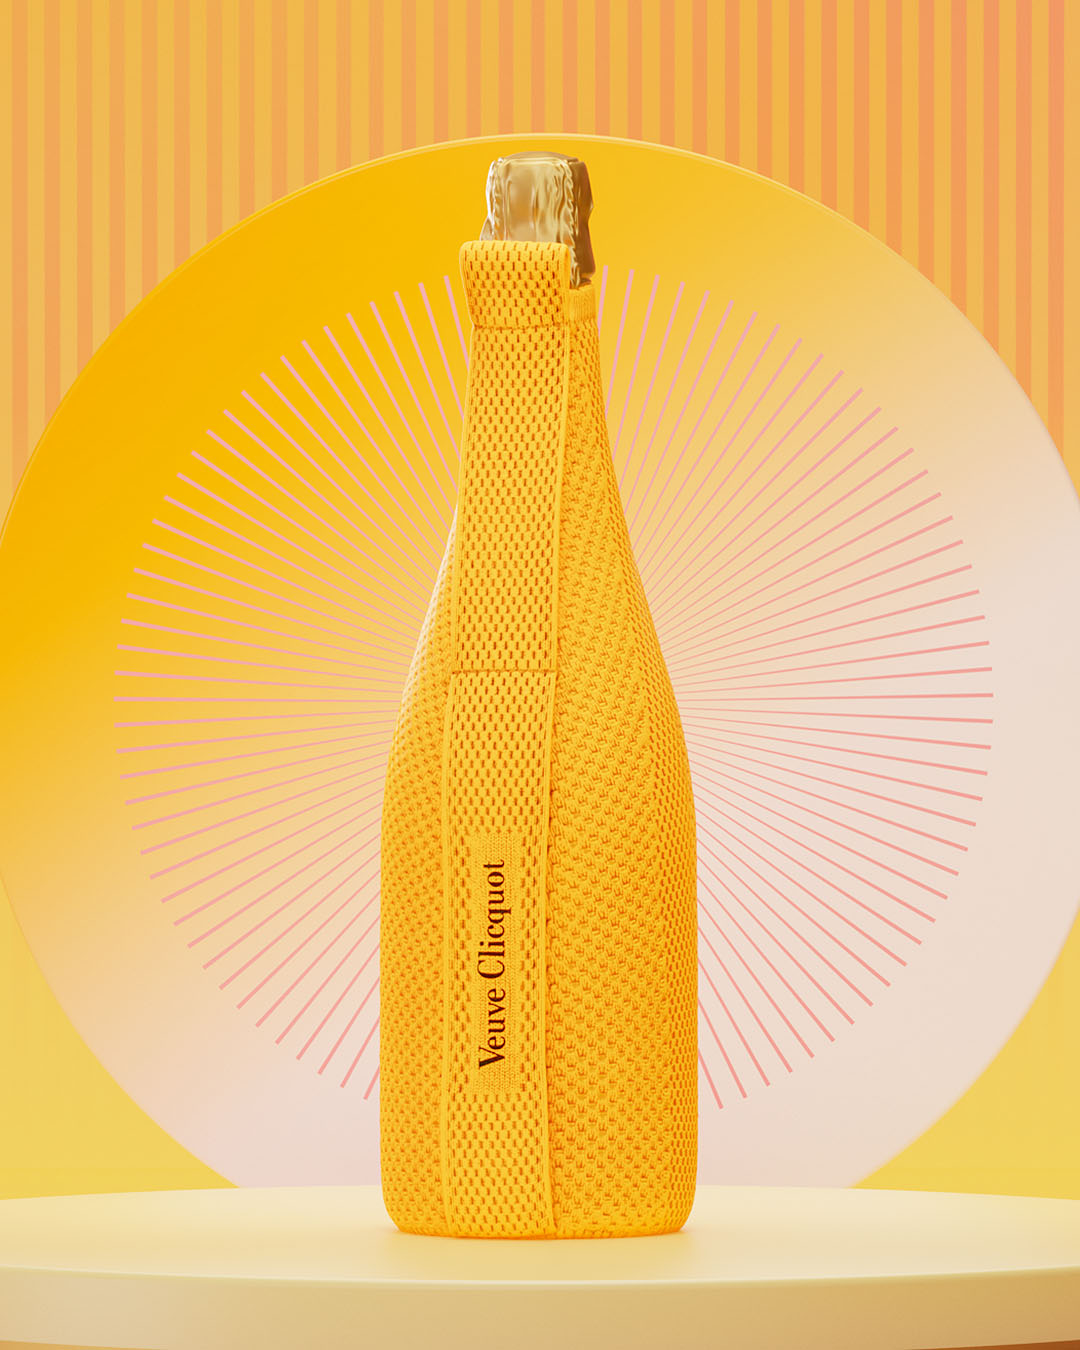 A bottle of Veuve looking cosy in its ice jacket.